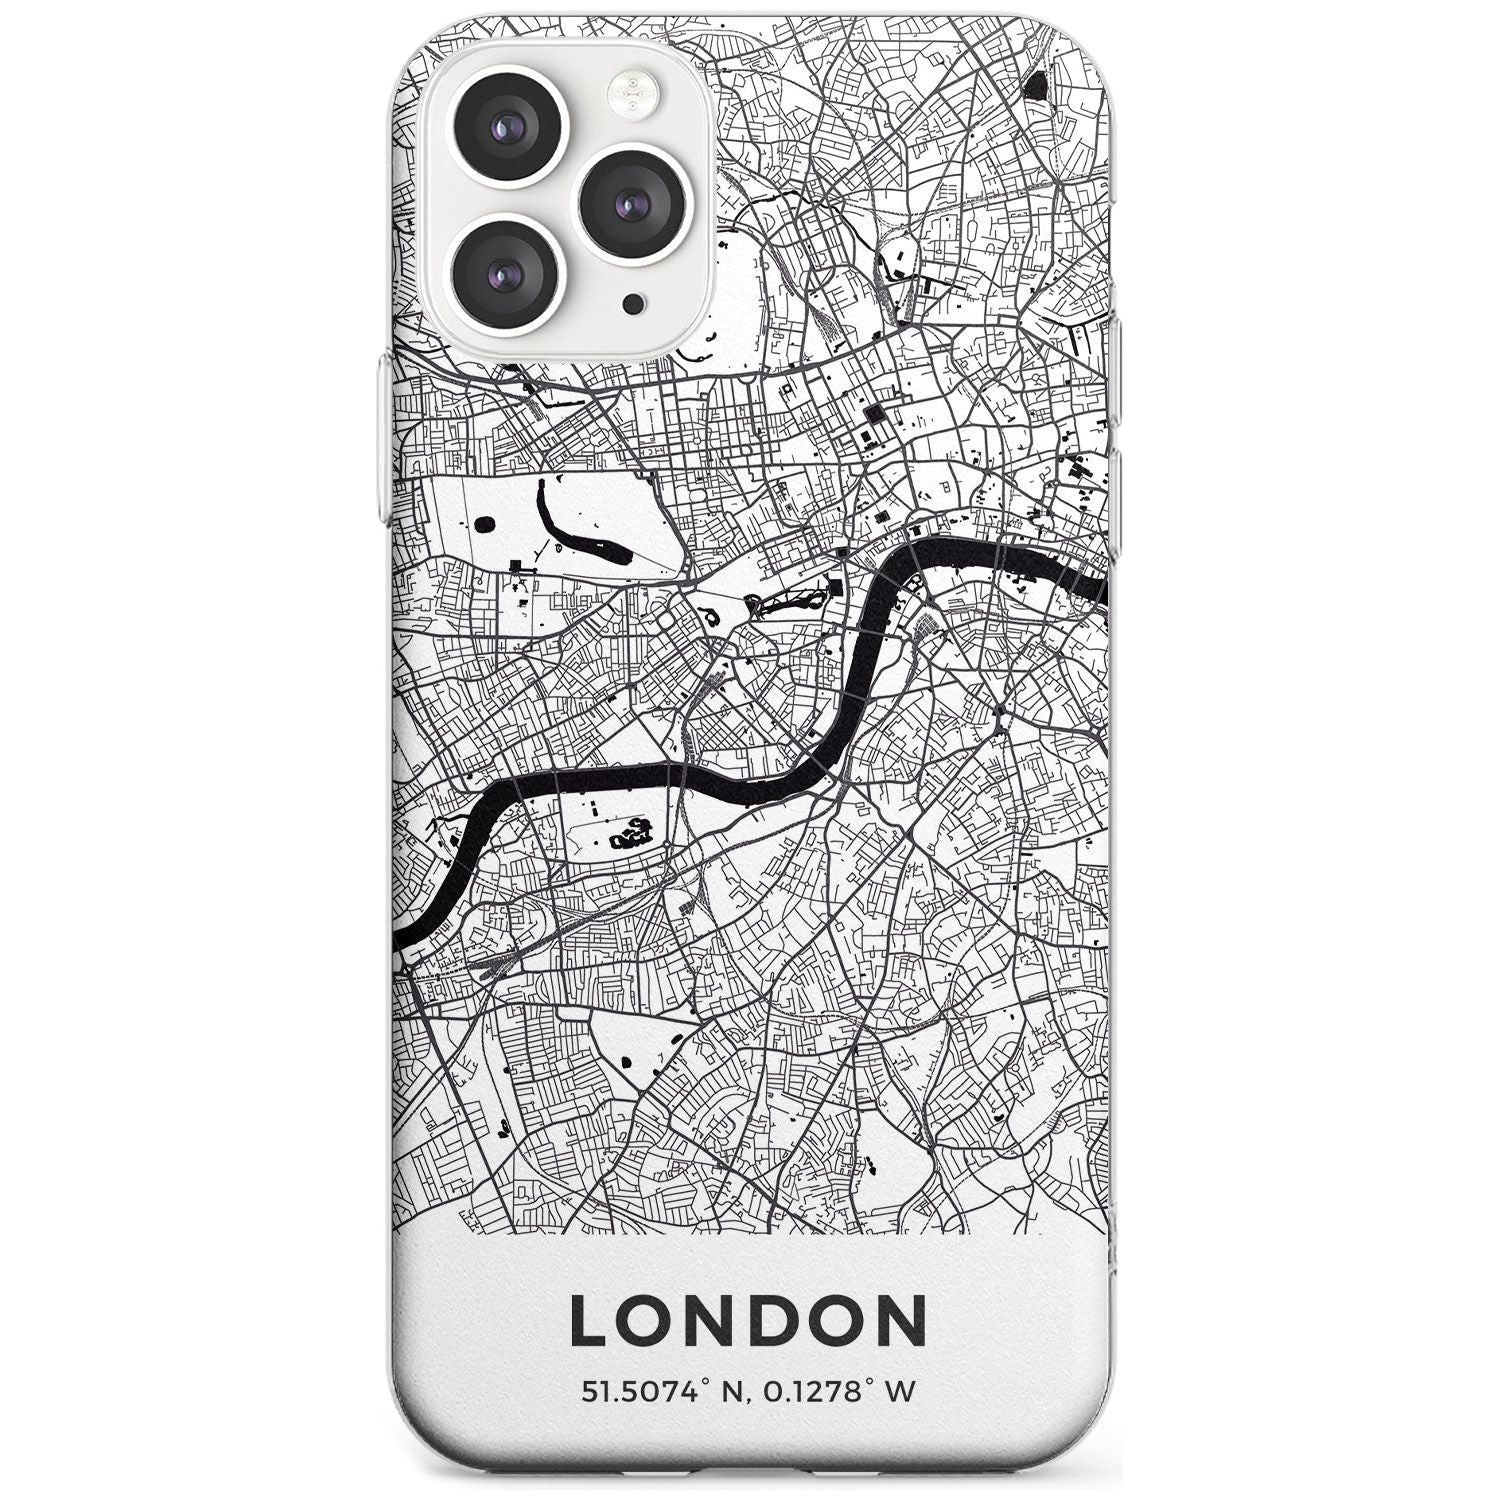 Map of London, England Slim TPU Phone Case for iPhone 11 Pro Max